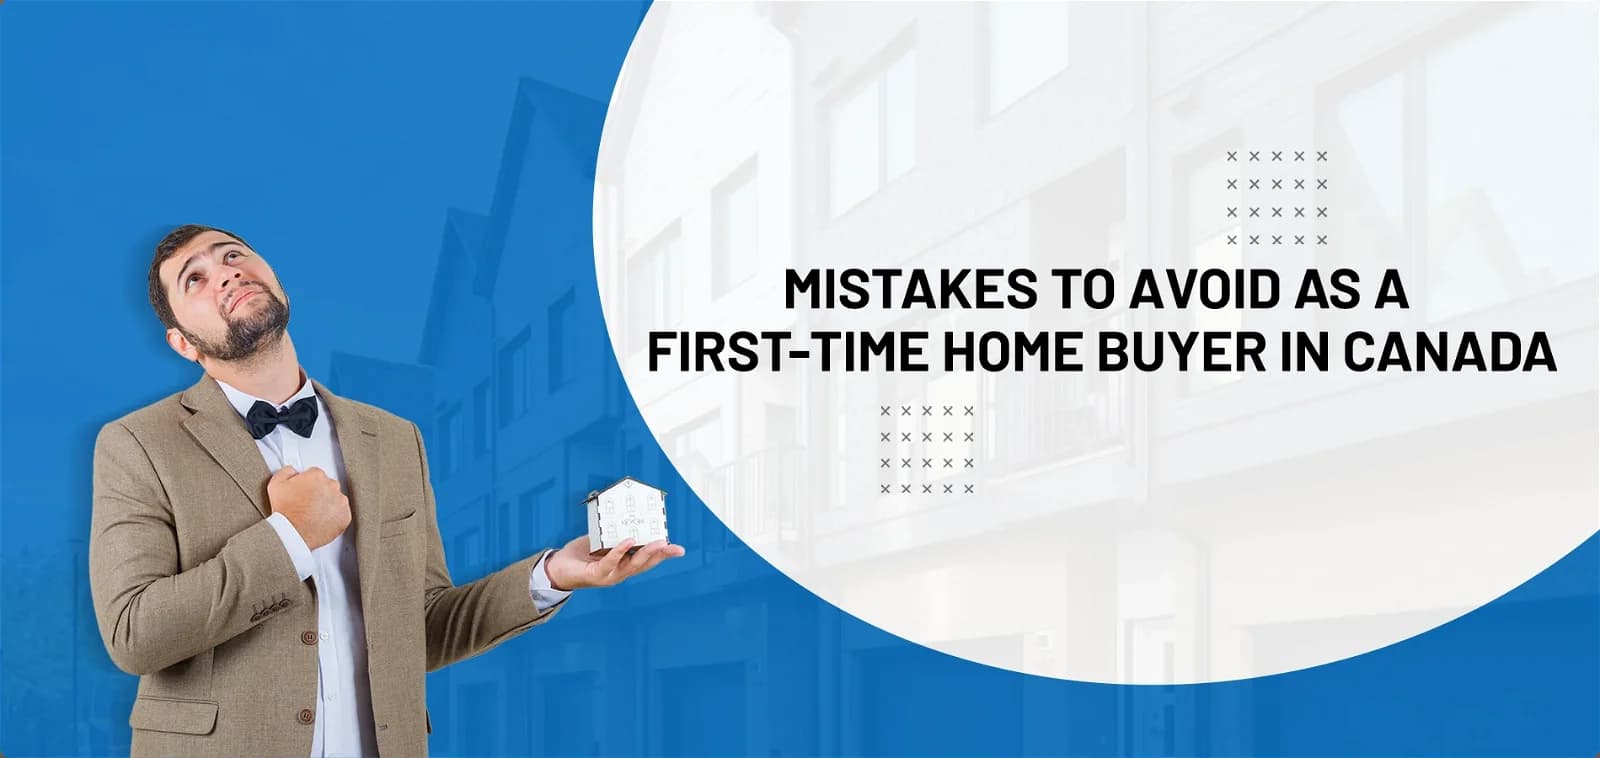 Mistakes To Avoid as a First-Time Home Buyer